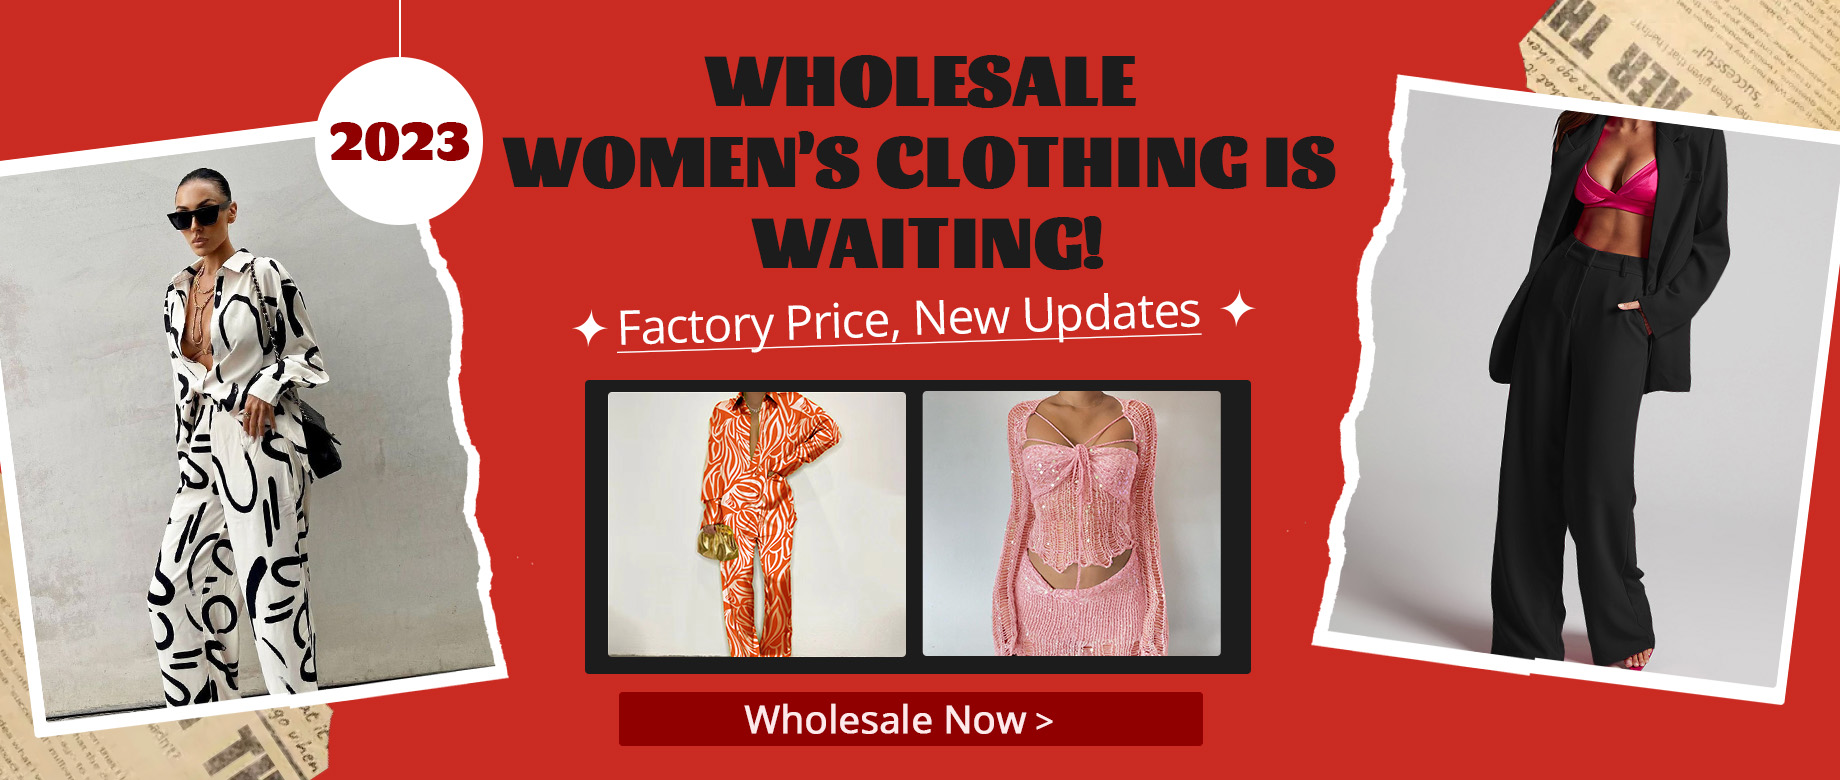 THE MOST PROFITABLE PROJECT OF THE FALL SEASON- WHOLESALE WOMEN’S CLOTHING IS WAITING!